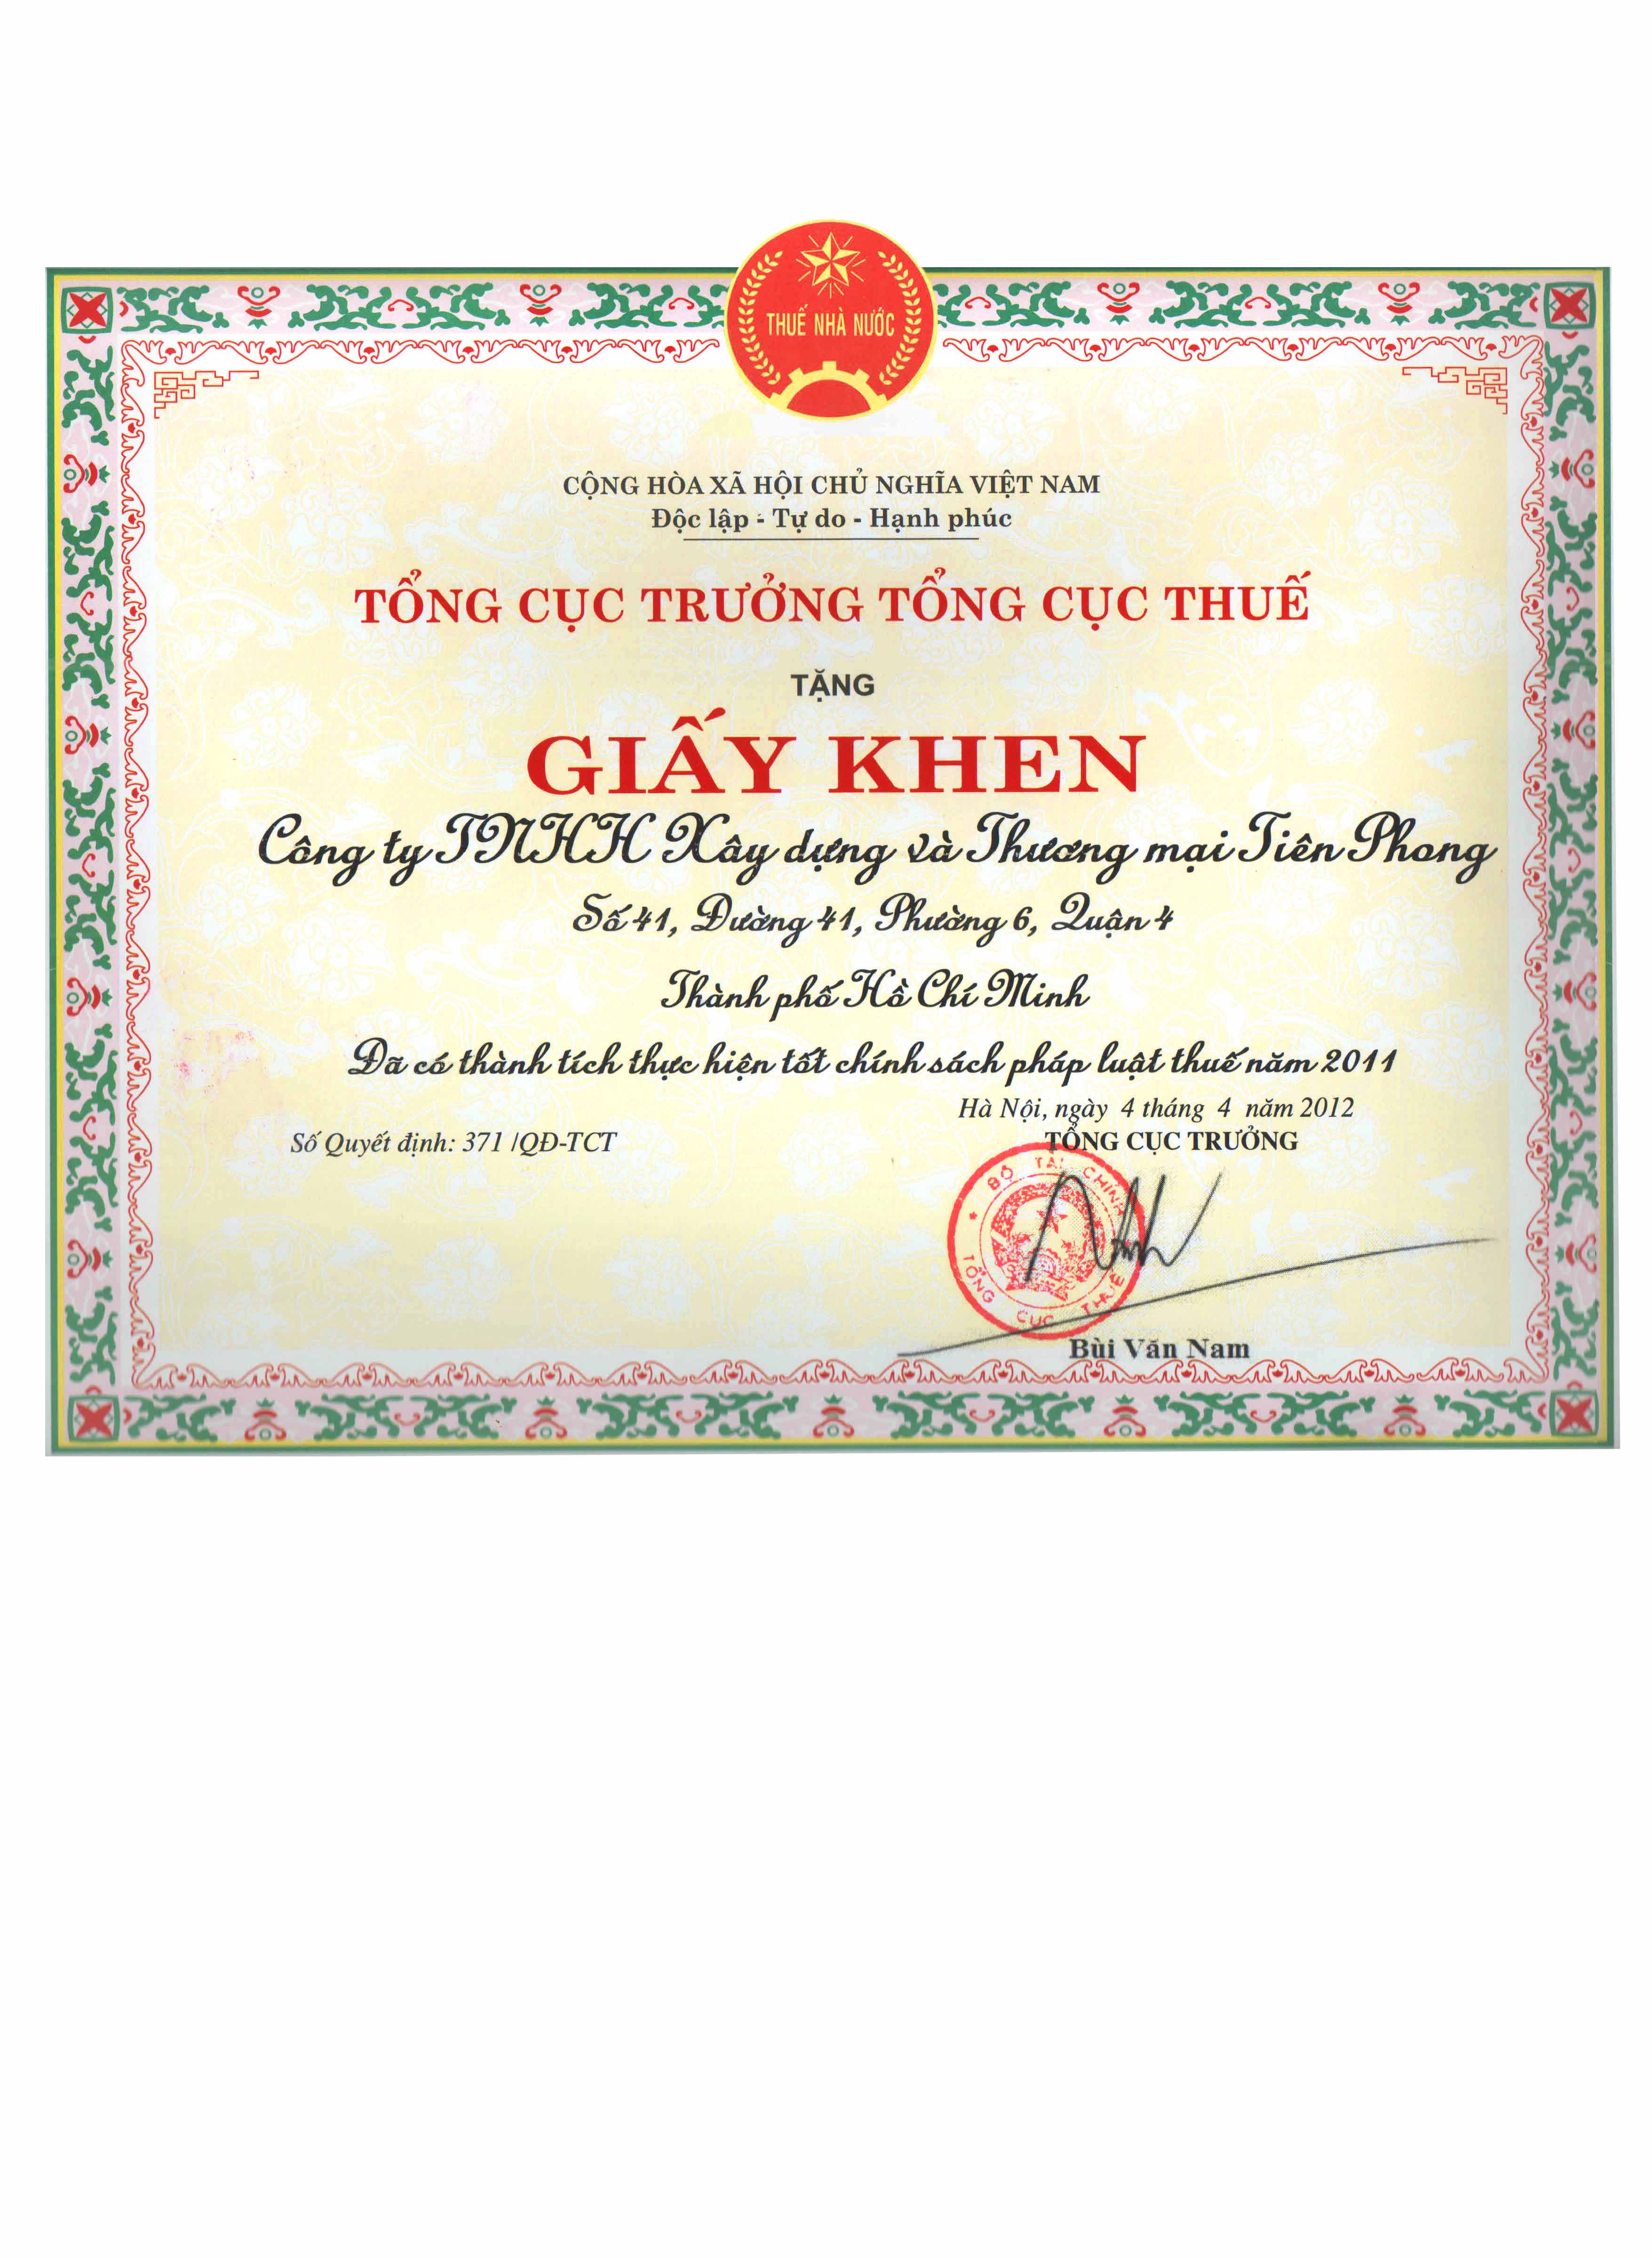 The Honor Certificate by HCMC Taxation Department (2011)